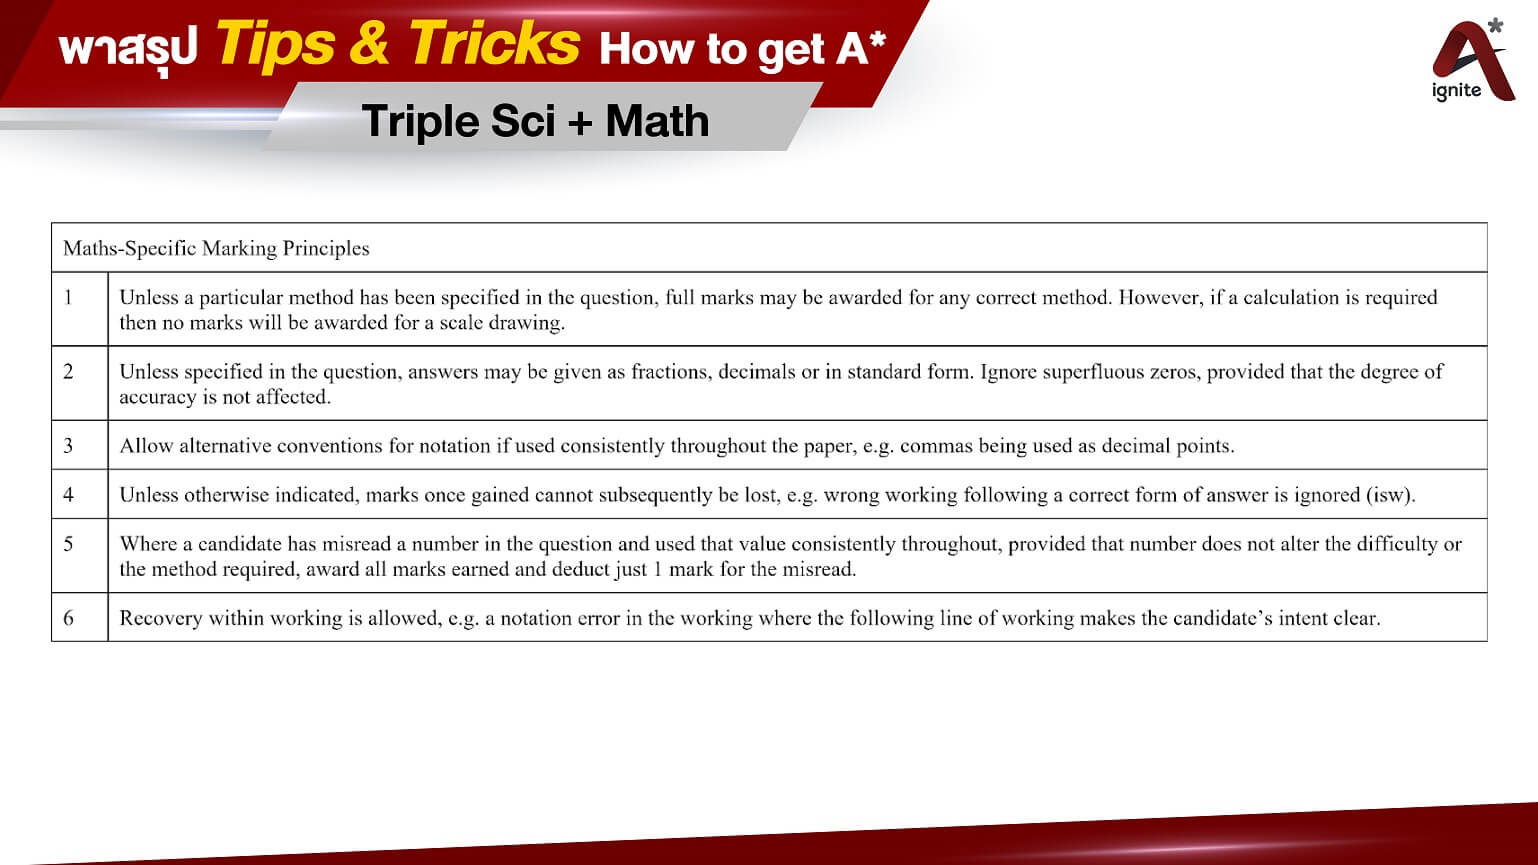 tip and trick on how to get a star on IGCSE triple science and math by ignite a star